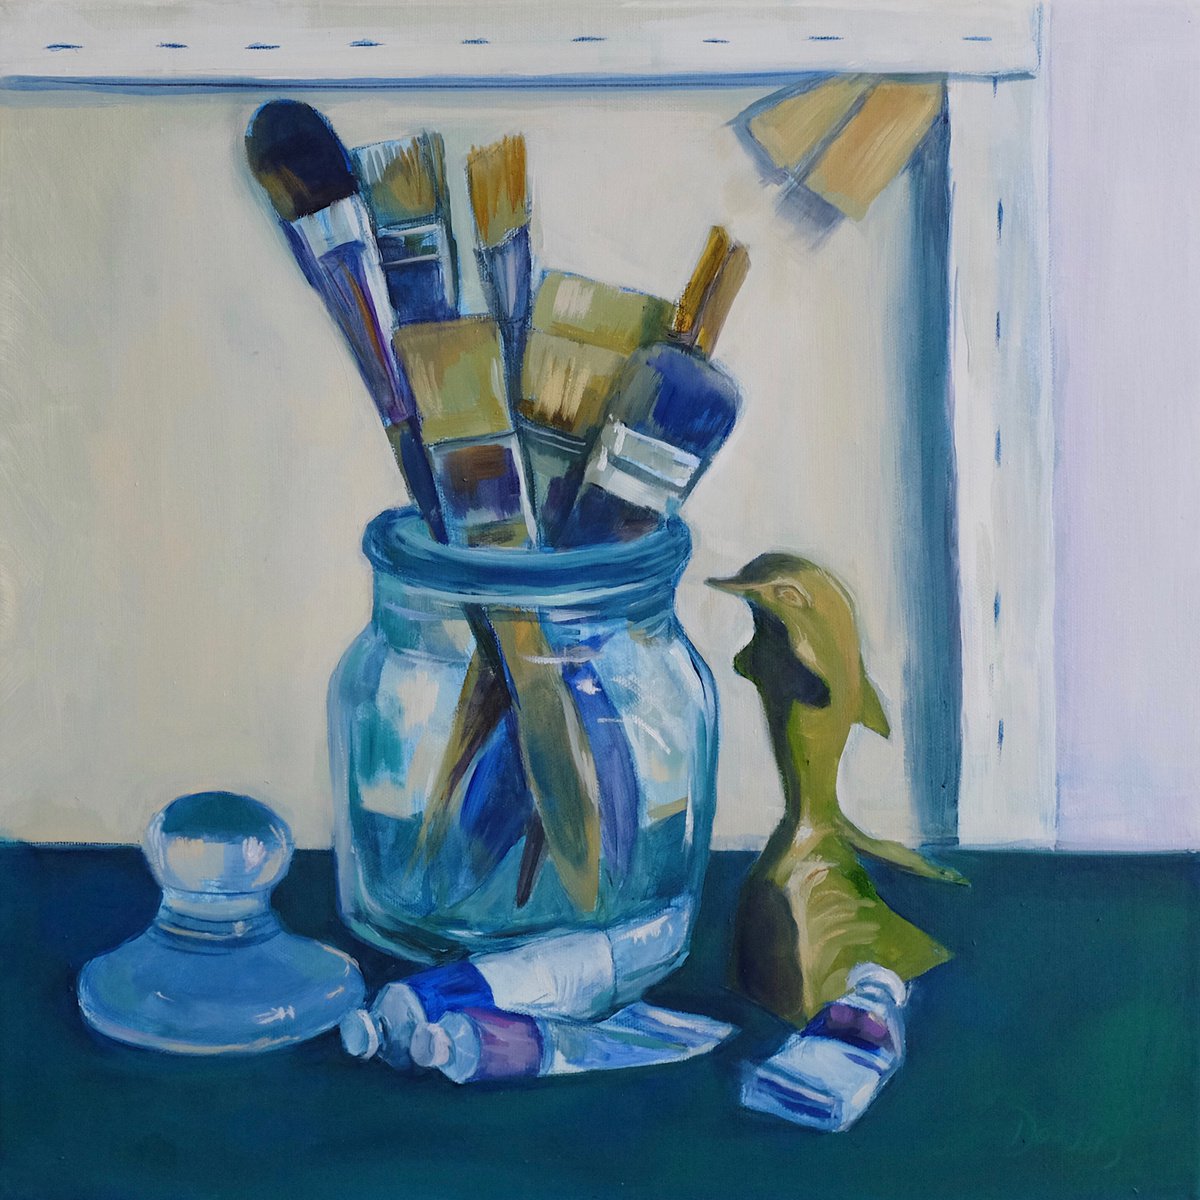 Studio Still Life with Dolphin by Dawn Rodger by Dawn Rodger